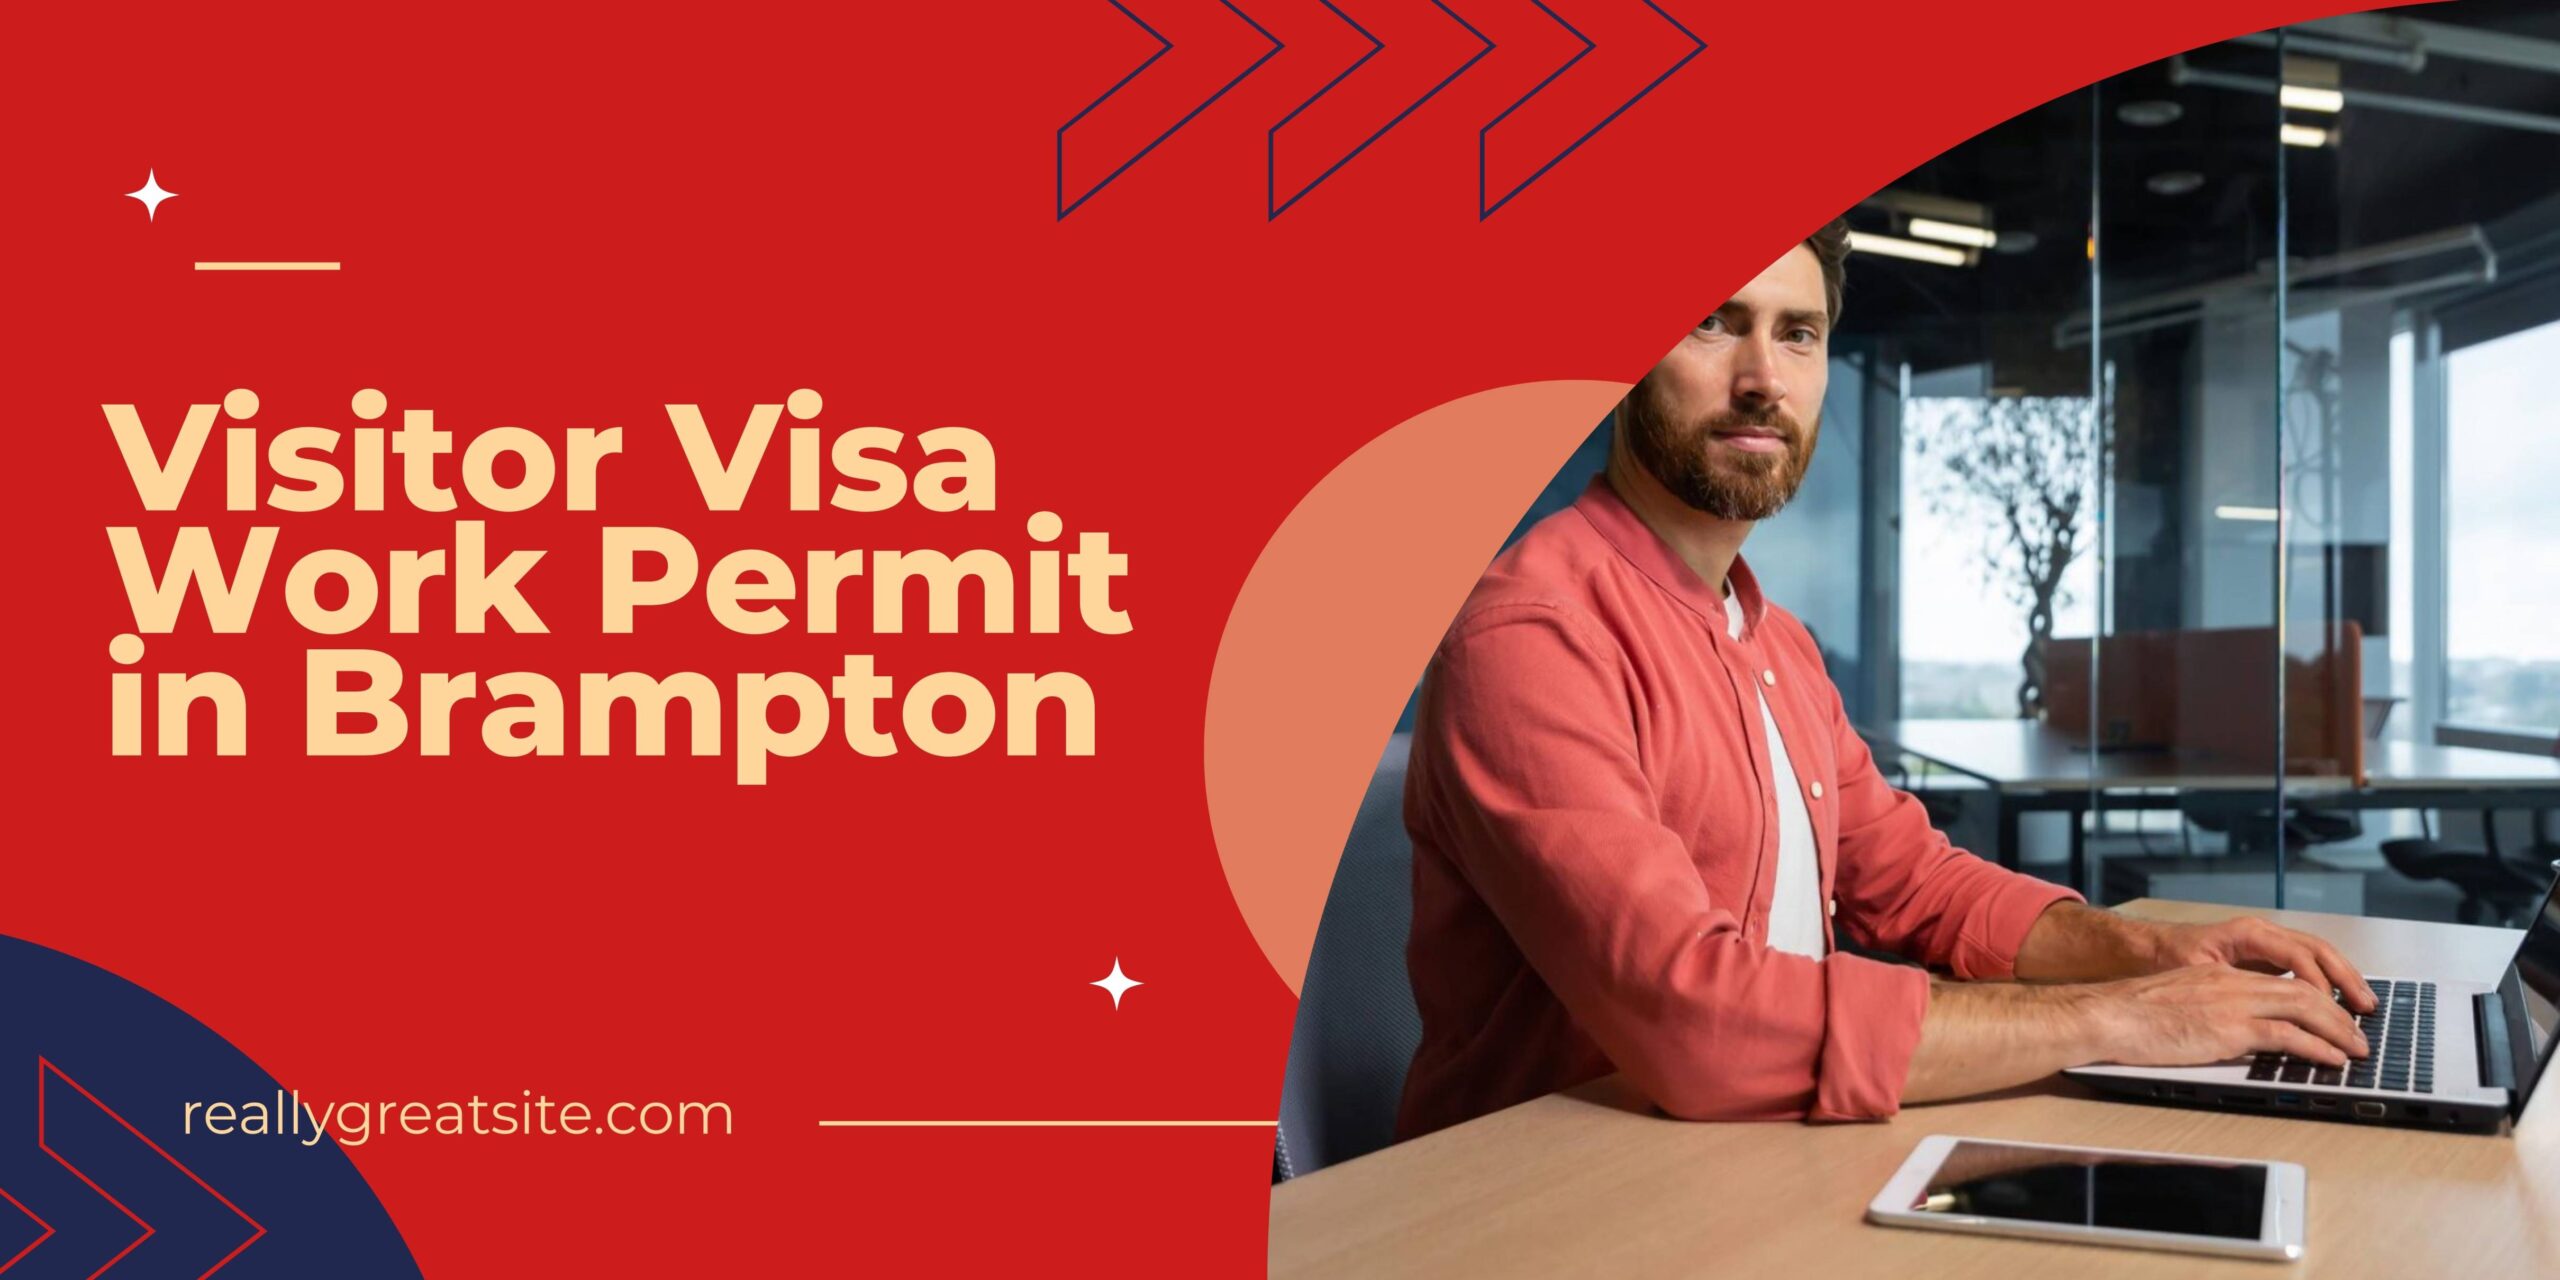 The Ultimate Guide to Obtaining a Visitor Visa Work Permit in Brampton